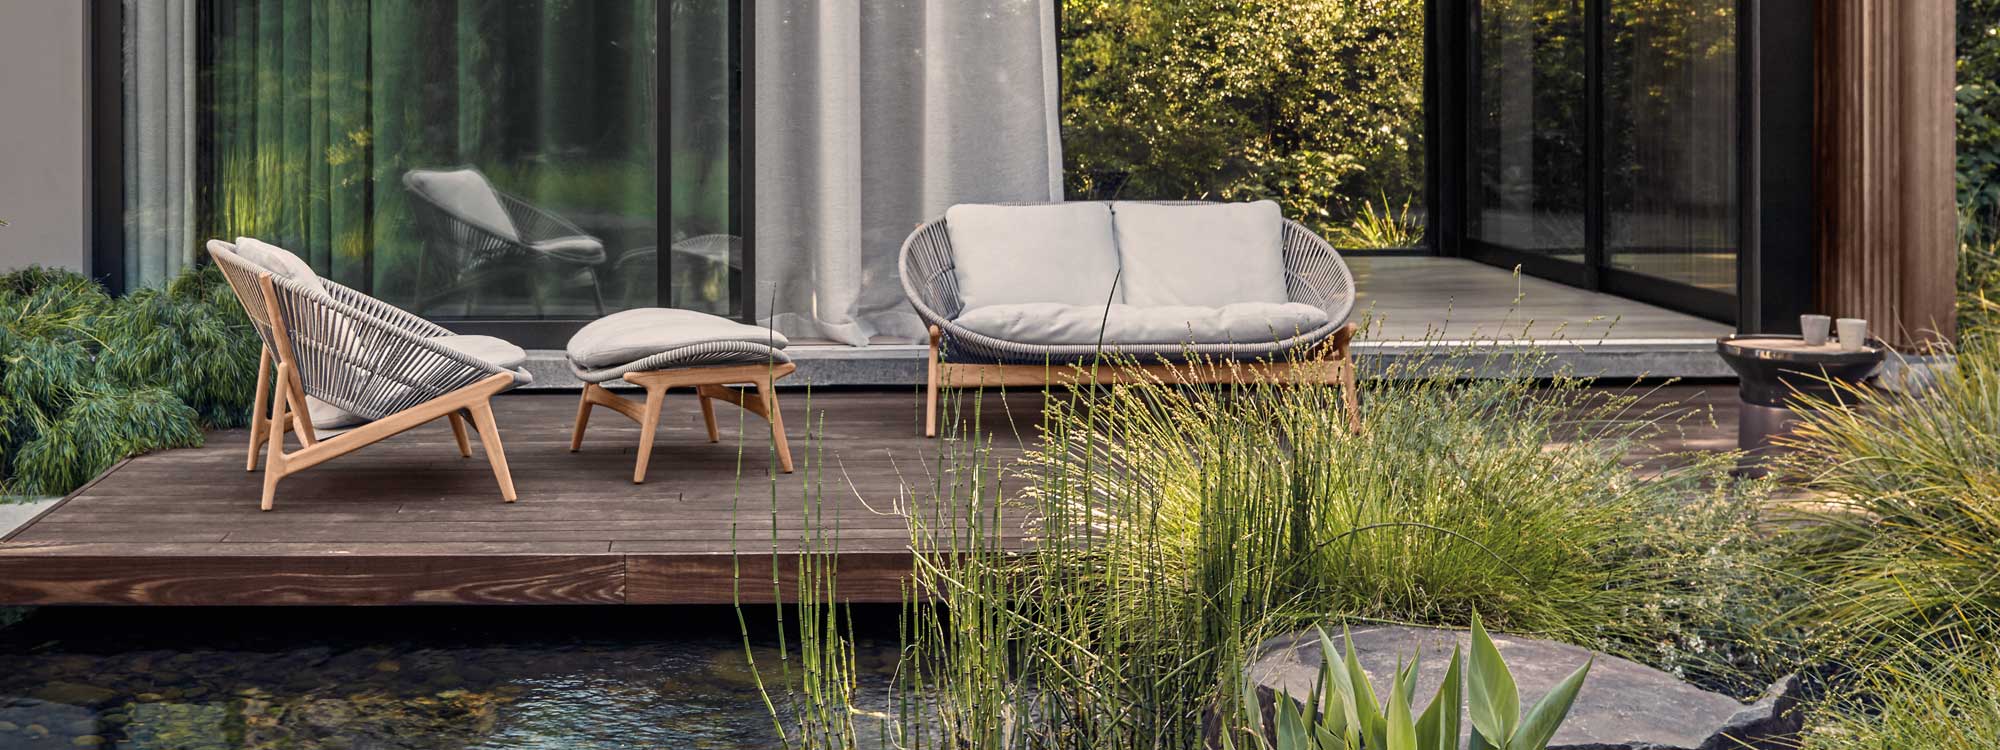 Image of Bora modern teak and rattan lounge furniture and Coso side table by Gloster on wooden decking